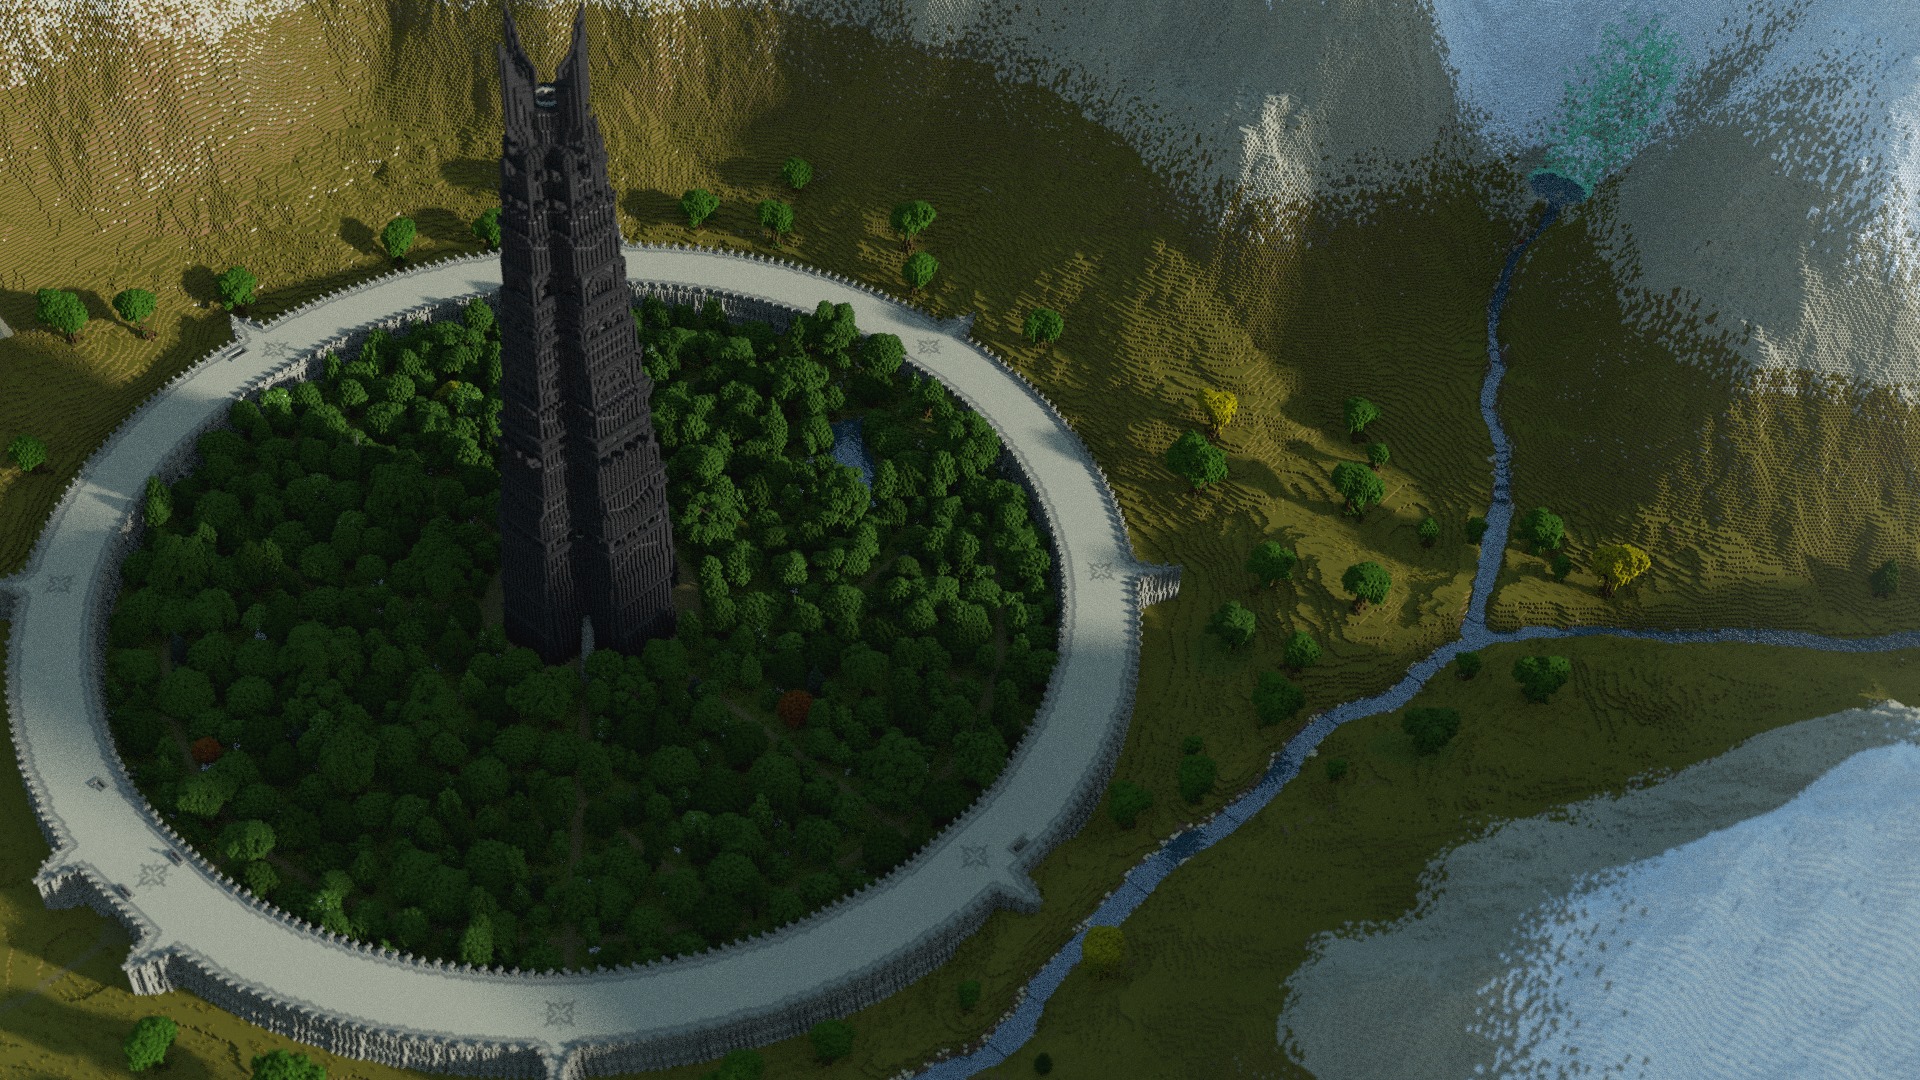 The Lord of the Rings in Minecraft: Celebrating 10 years of building! 